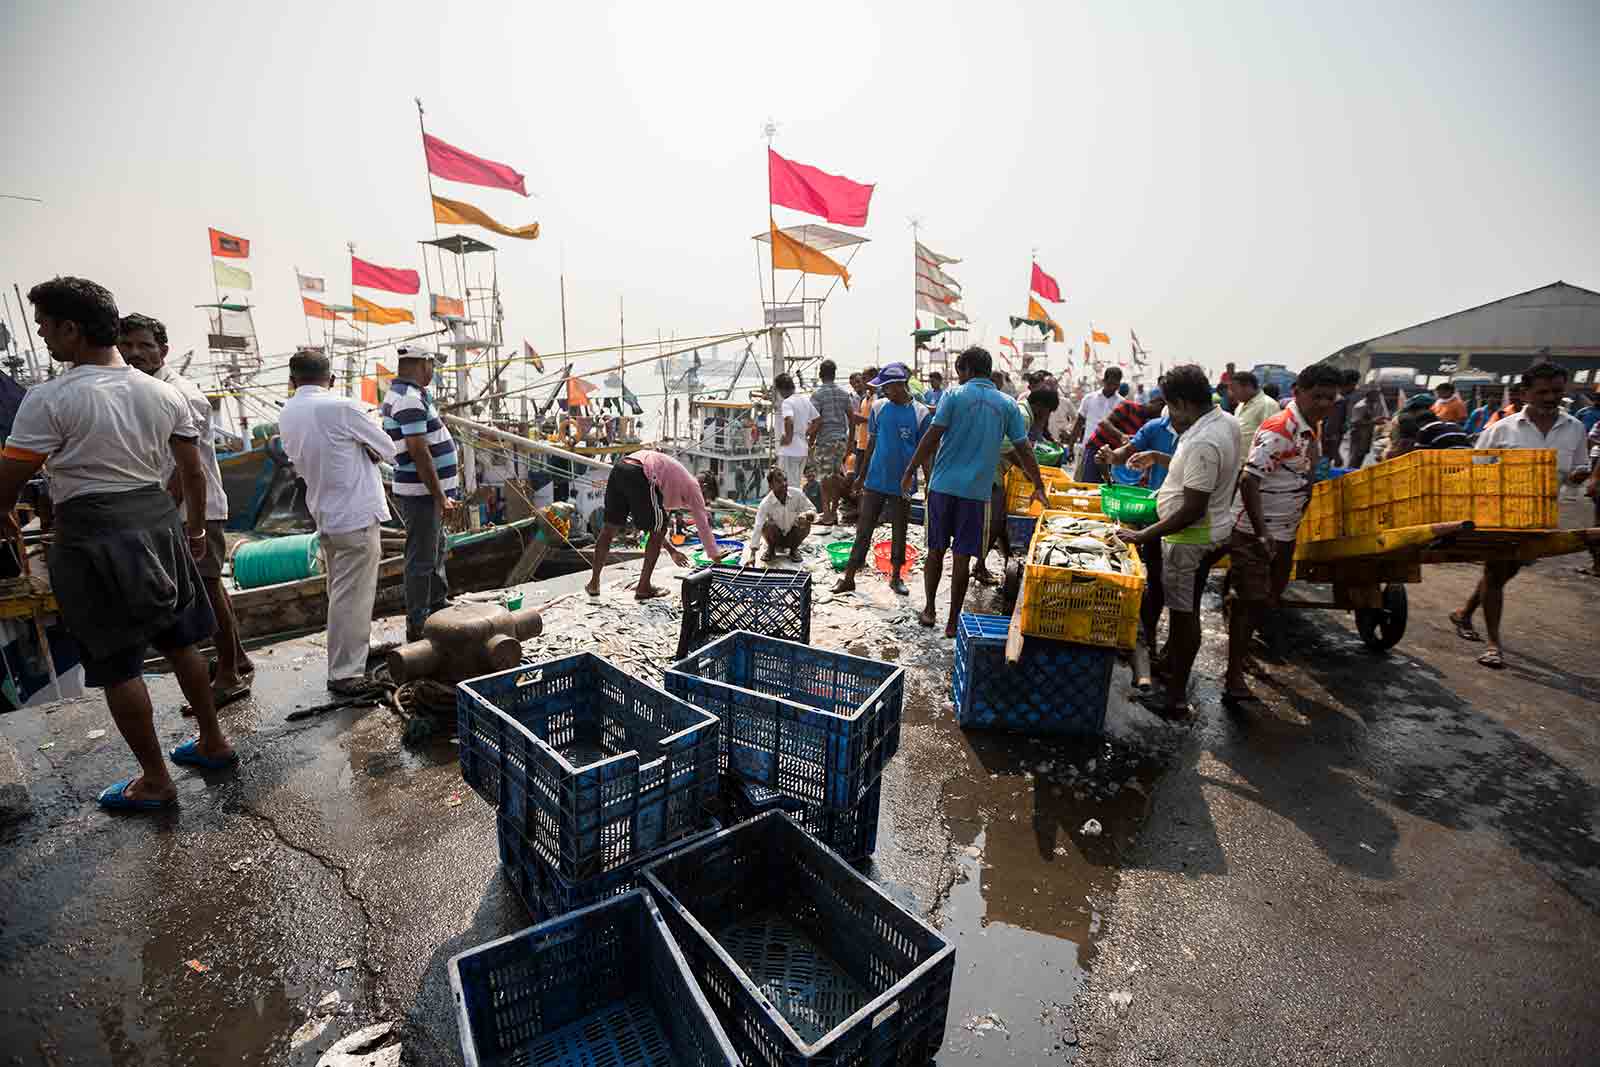 A typical day at Sassoon Docks begins at 5 am when the fresh catch is brought in from the sea.